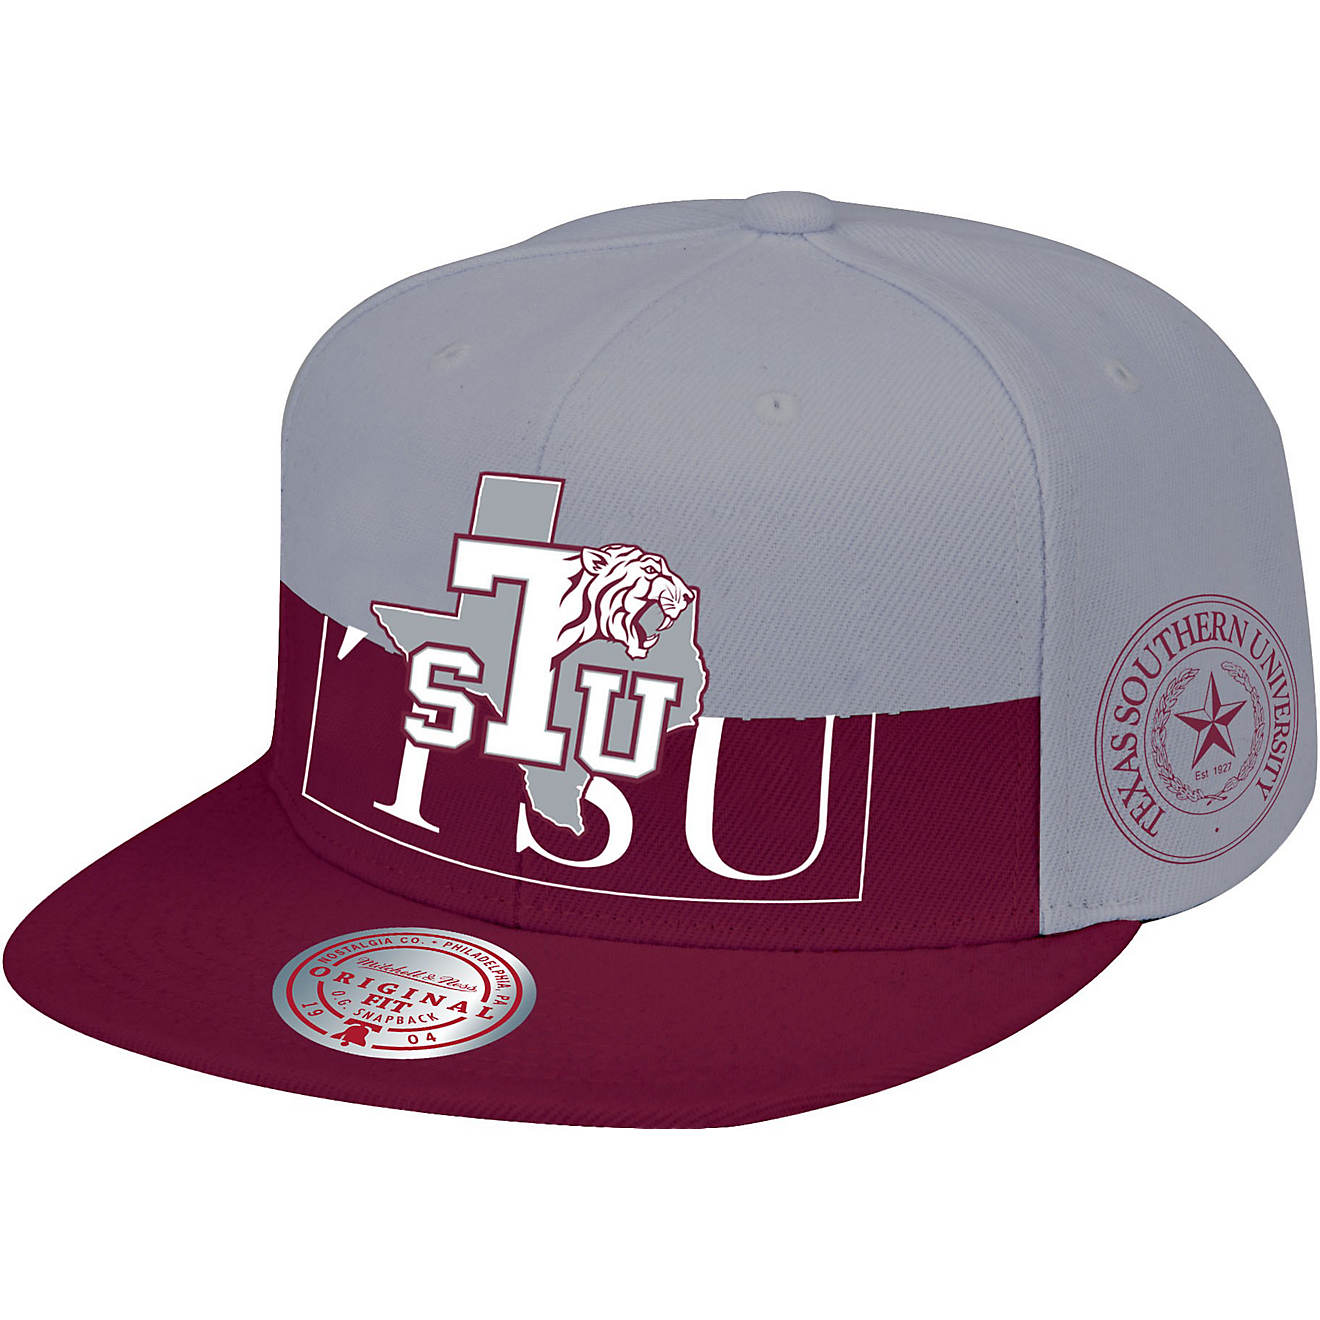 Texas Southern Tigers Mitchell & Ness Half And Half Snapback Cap/Hat